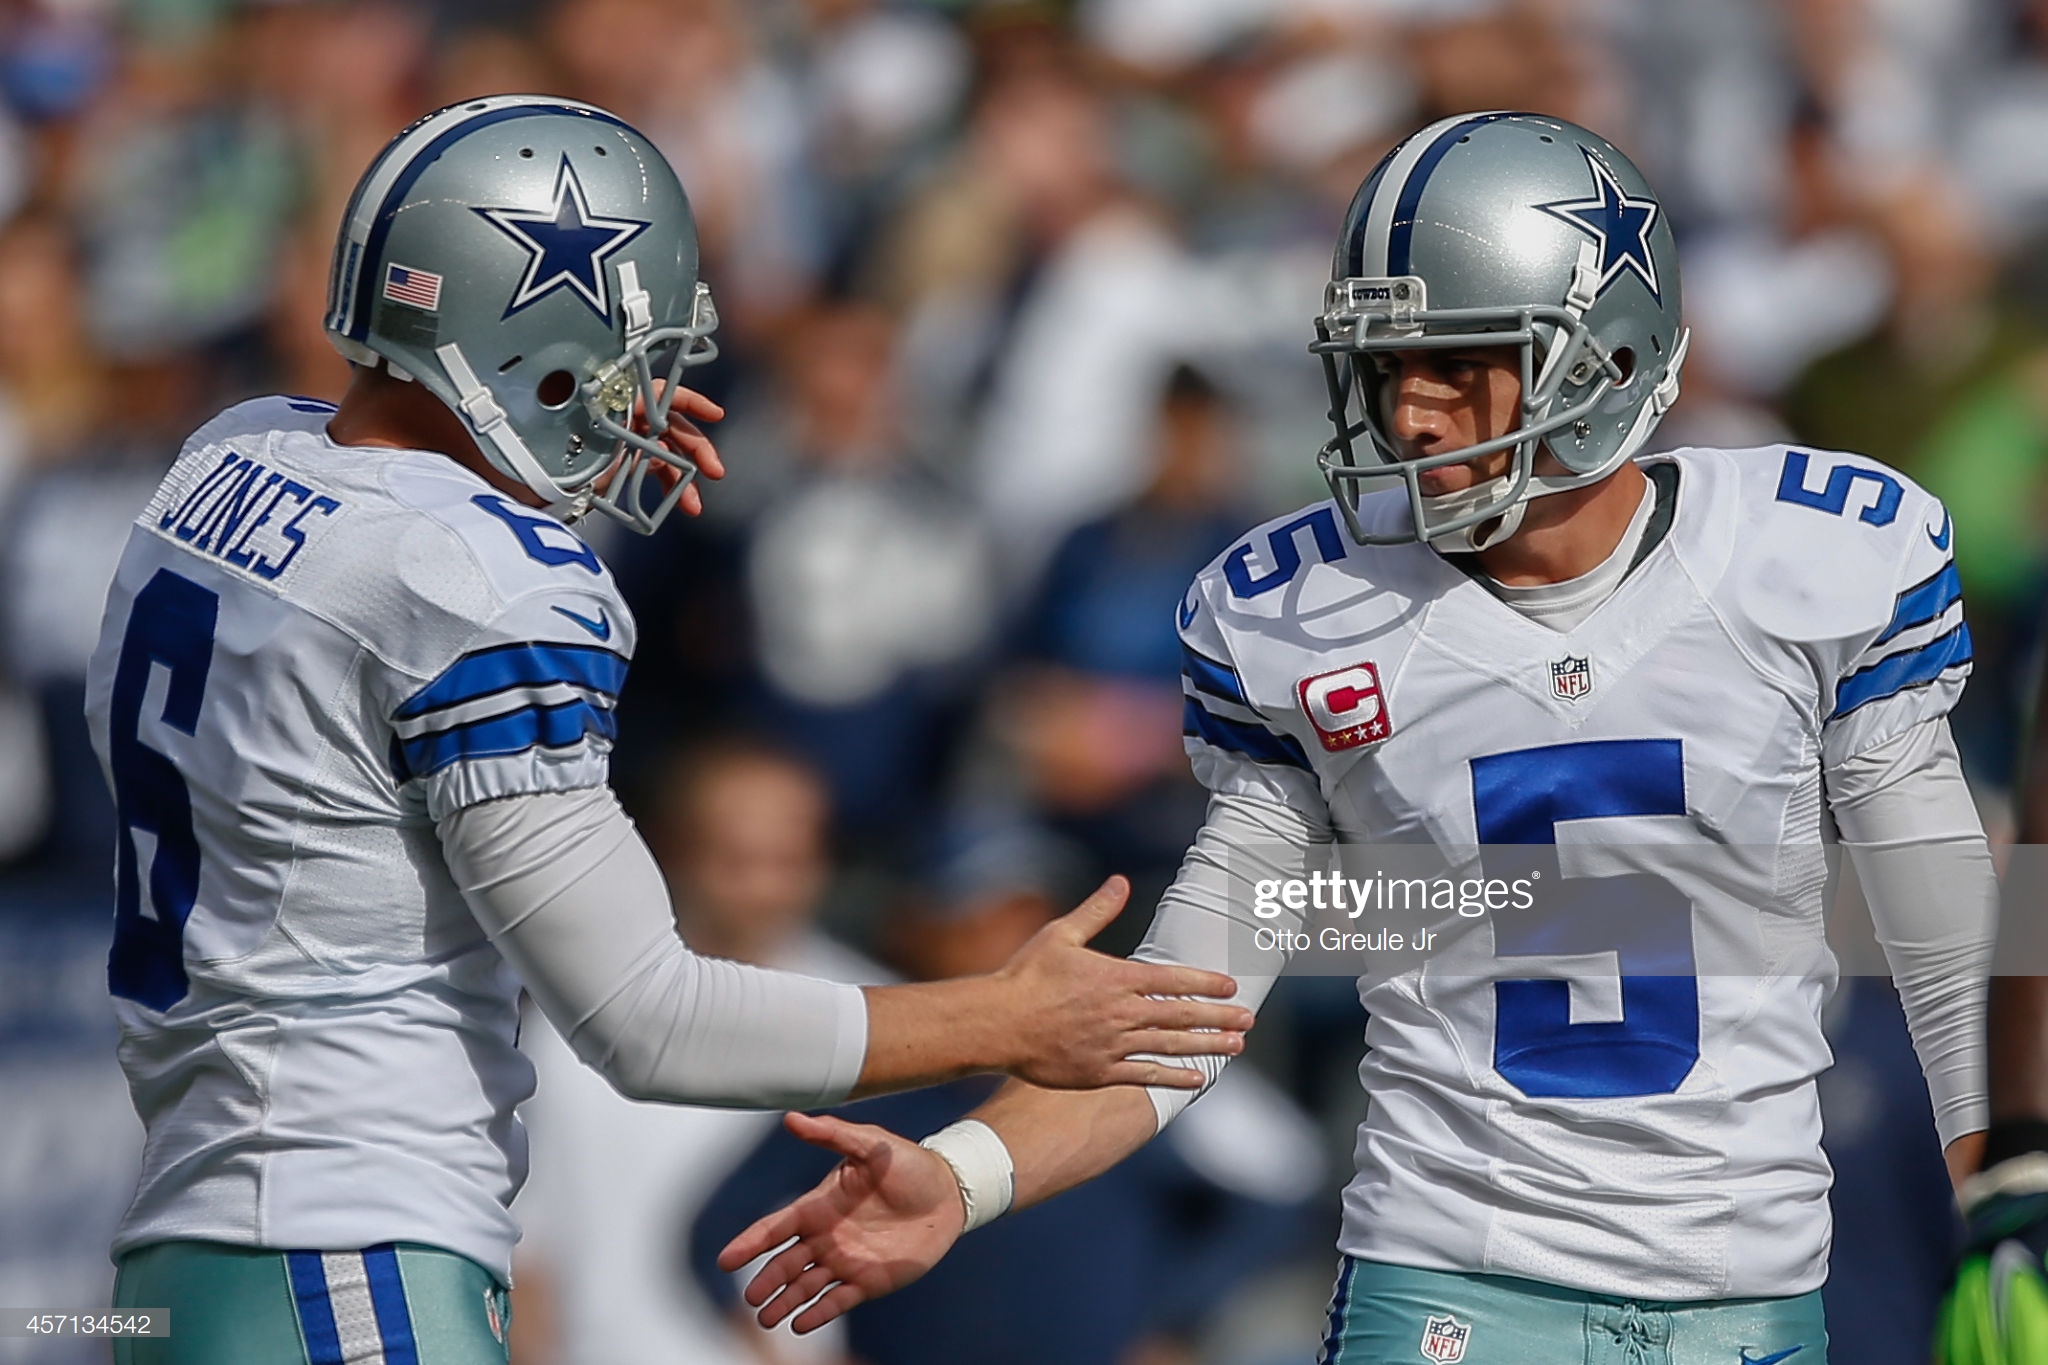 SEATTLE, WA - OCTOBER 12:  Kicker Dan Bailey #5 of the Dallas Cowboys is congratulated by holder Chris Jones #6 after kicking a field goal to tie the score at 10-10 in the second quarter against the Seattle Seahawks at CenturyLink Field on October 12, 2014 in Seattle, Washington. The Cowboys defeated the Seahawks 30-23.  (Photo by Otto Greule Jr/Getty Images)